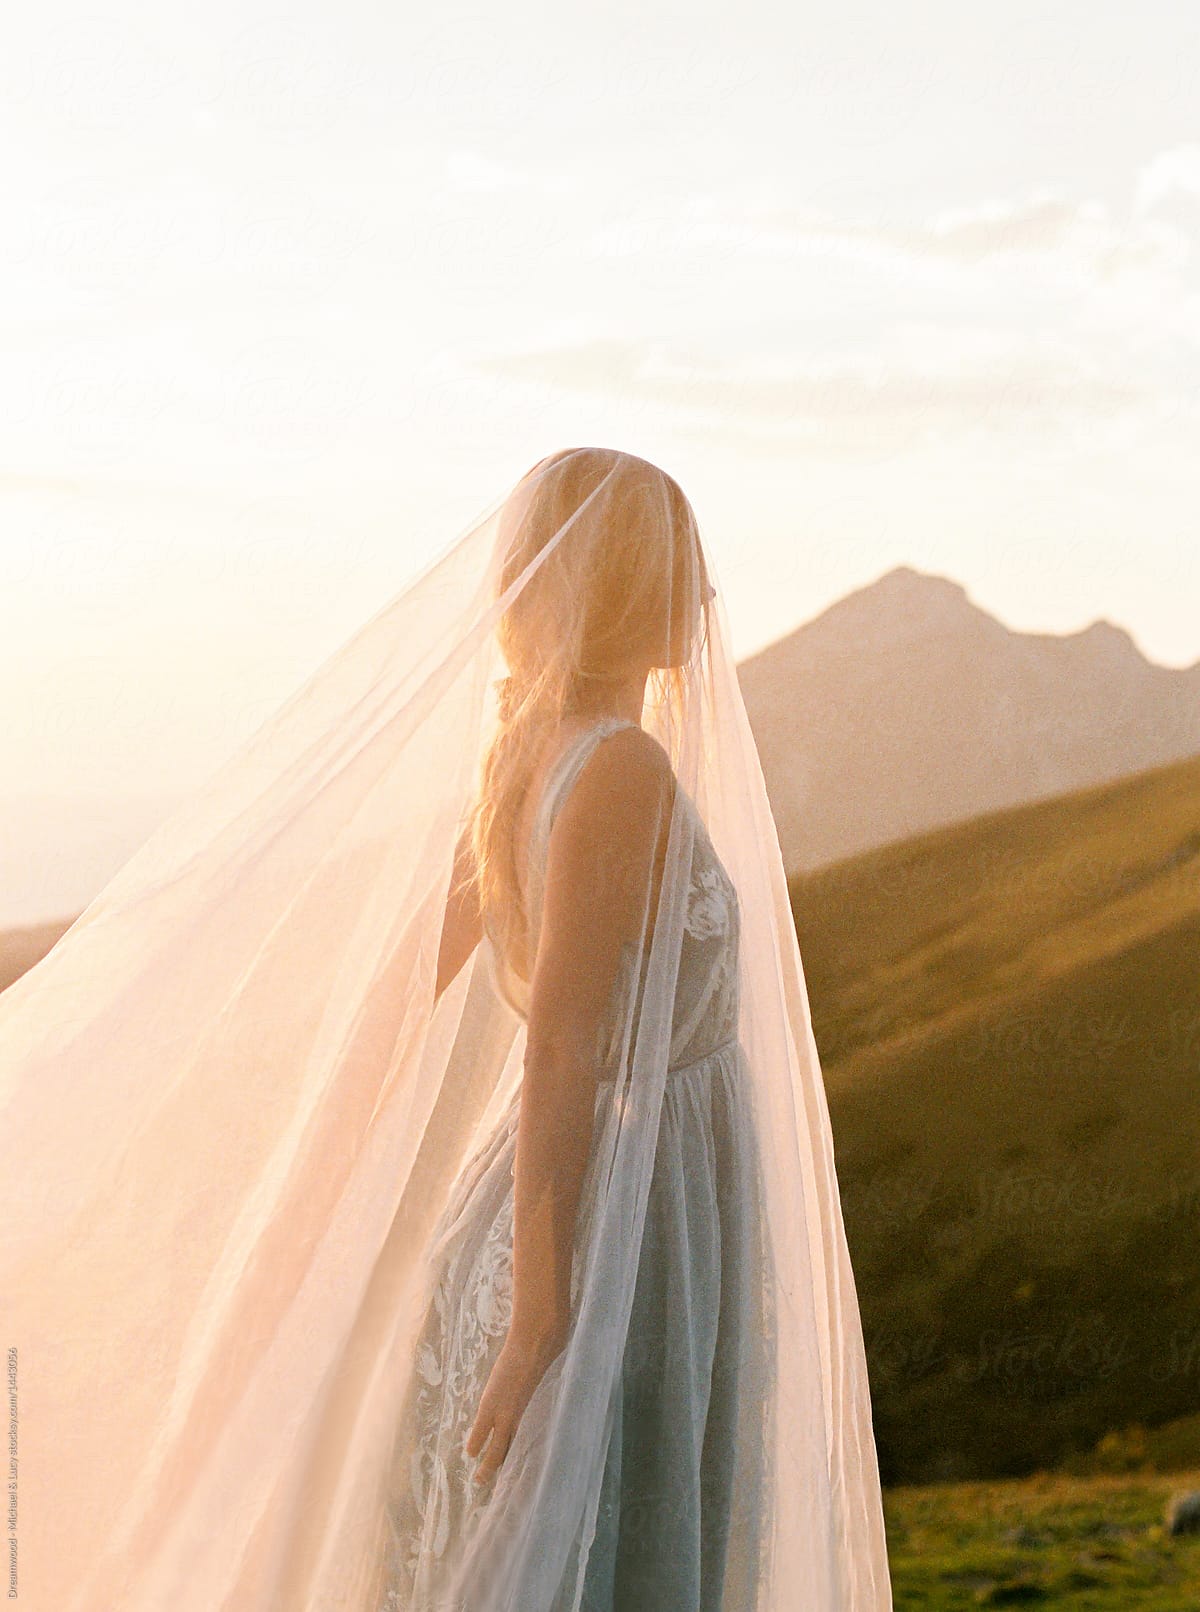 Woman in dress and veil on nature